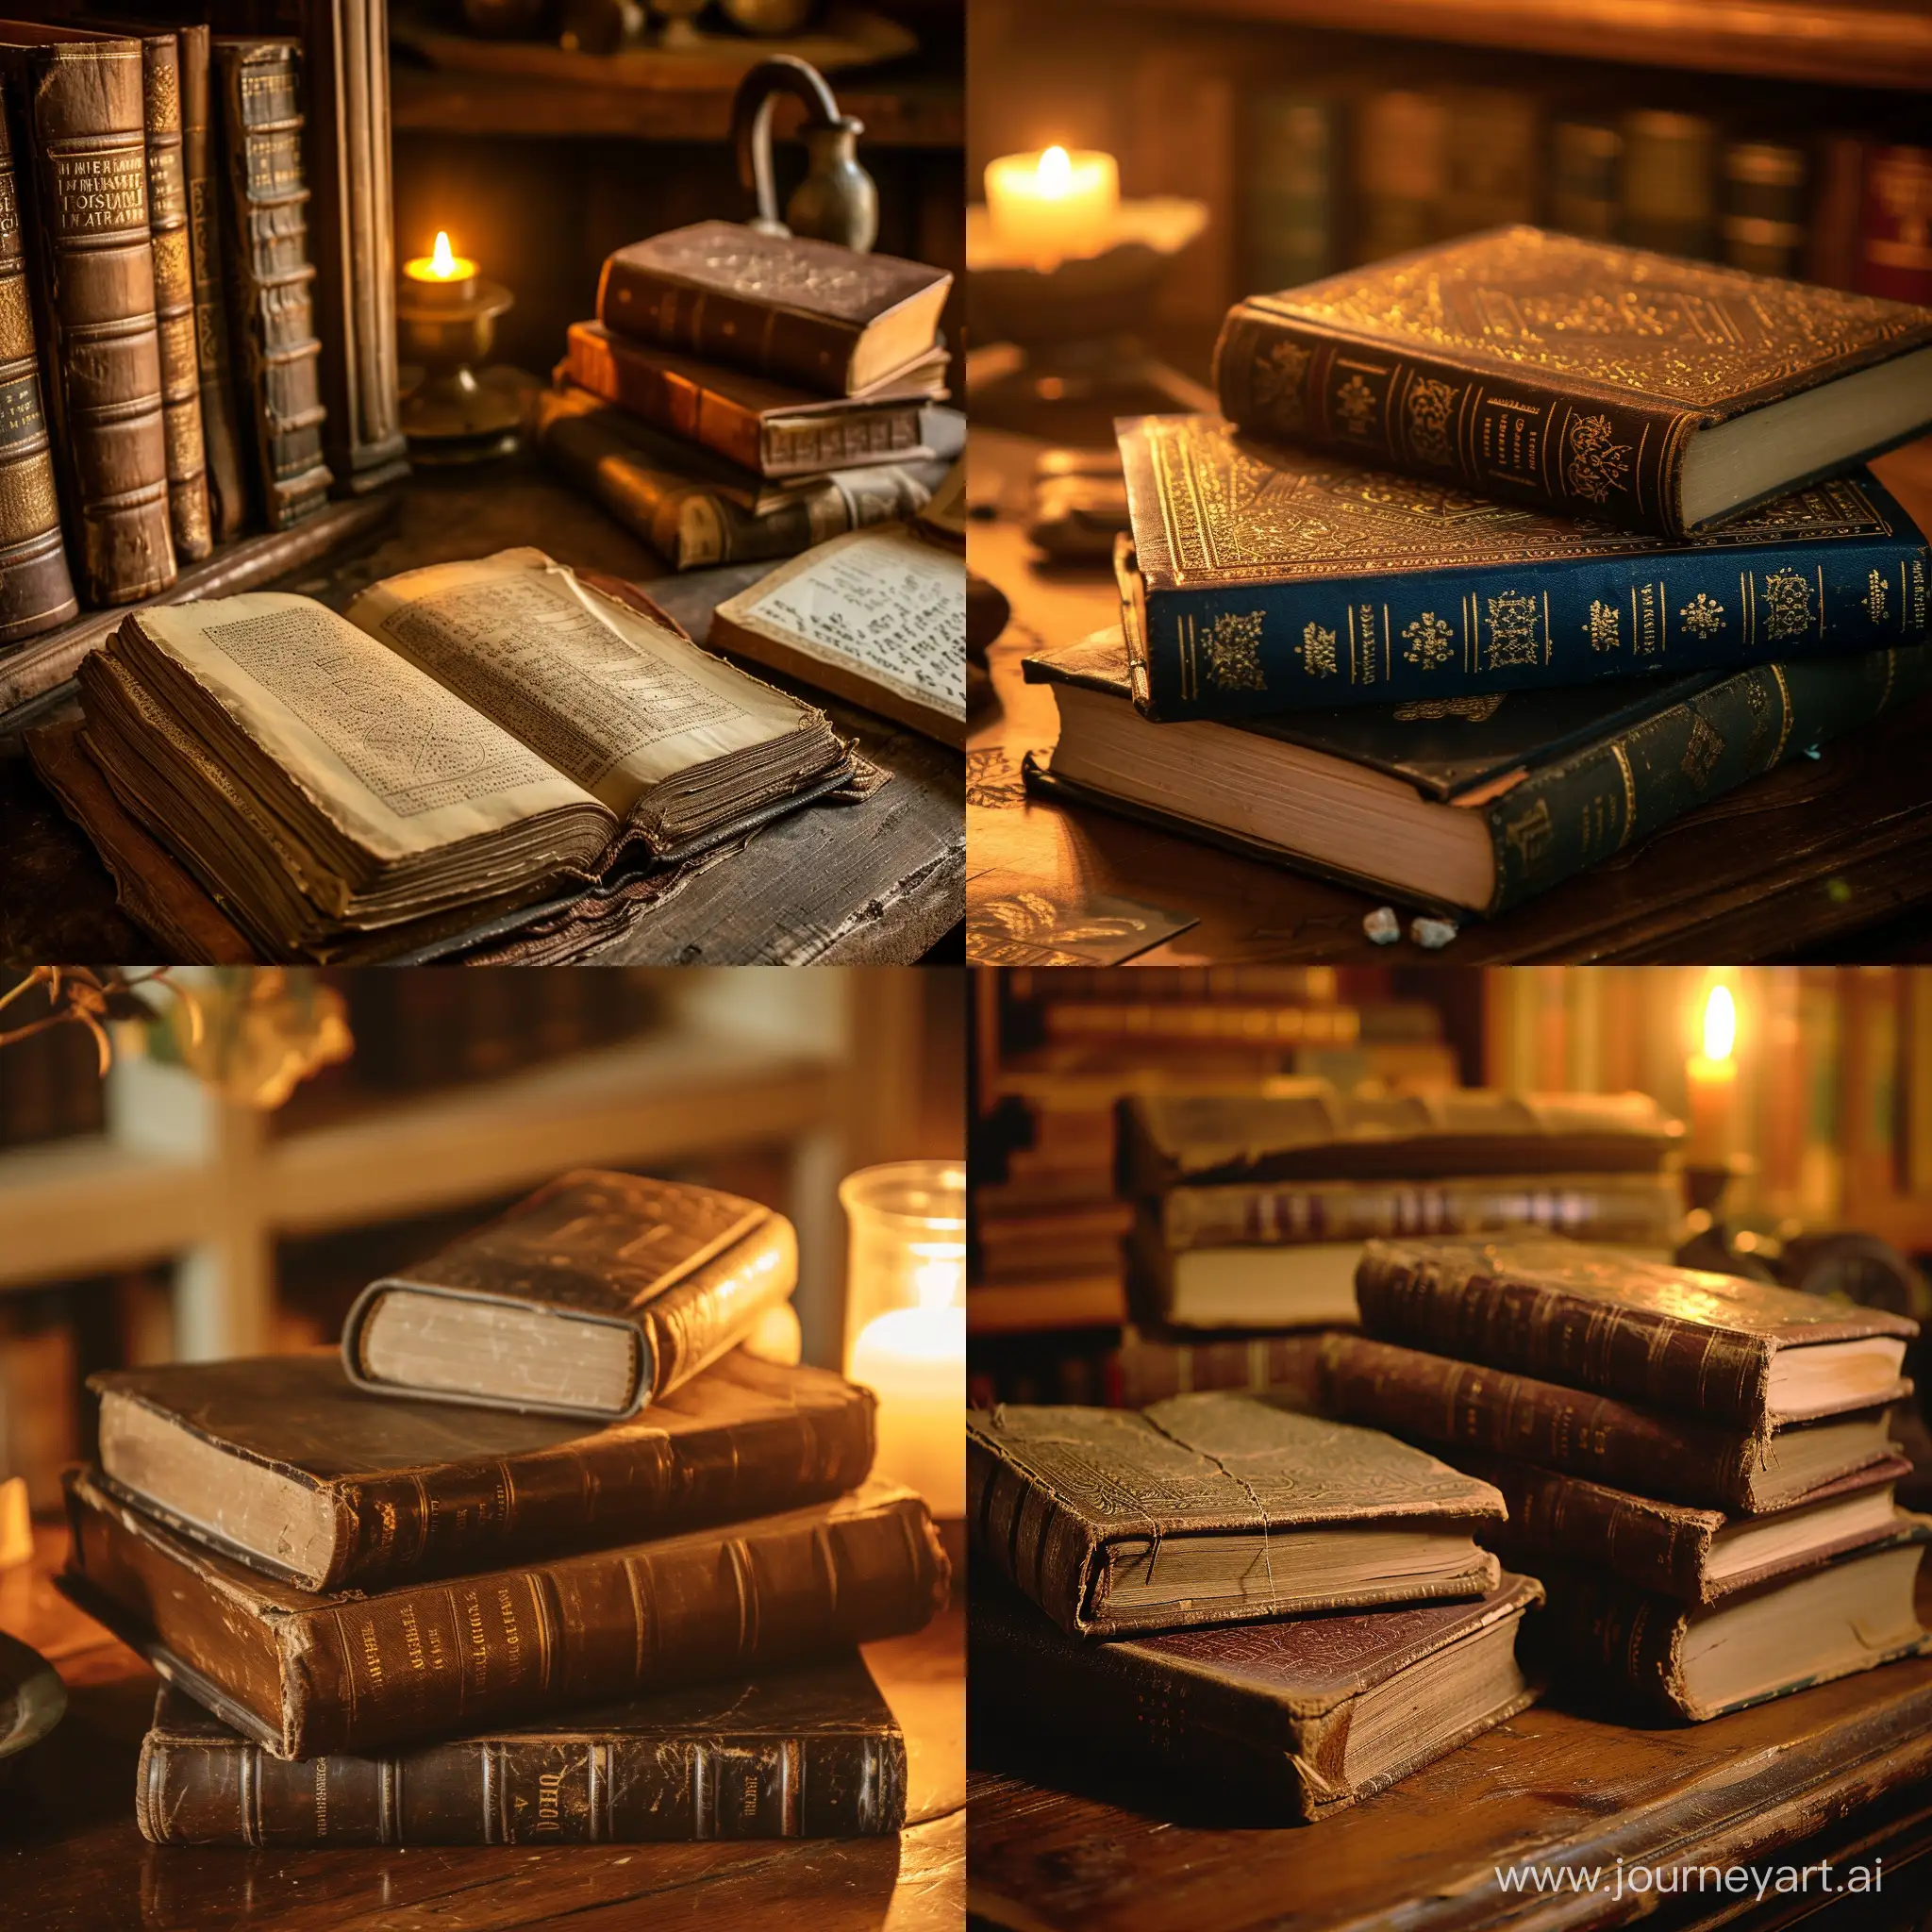 Ancient books on a desk with warm lighting